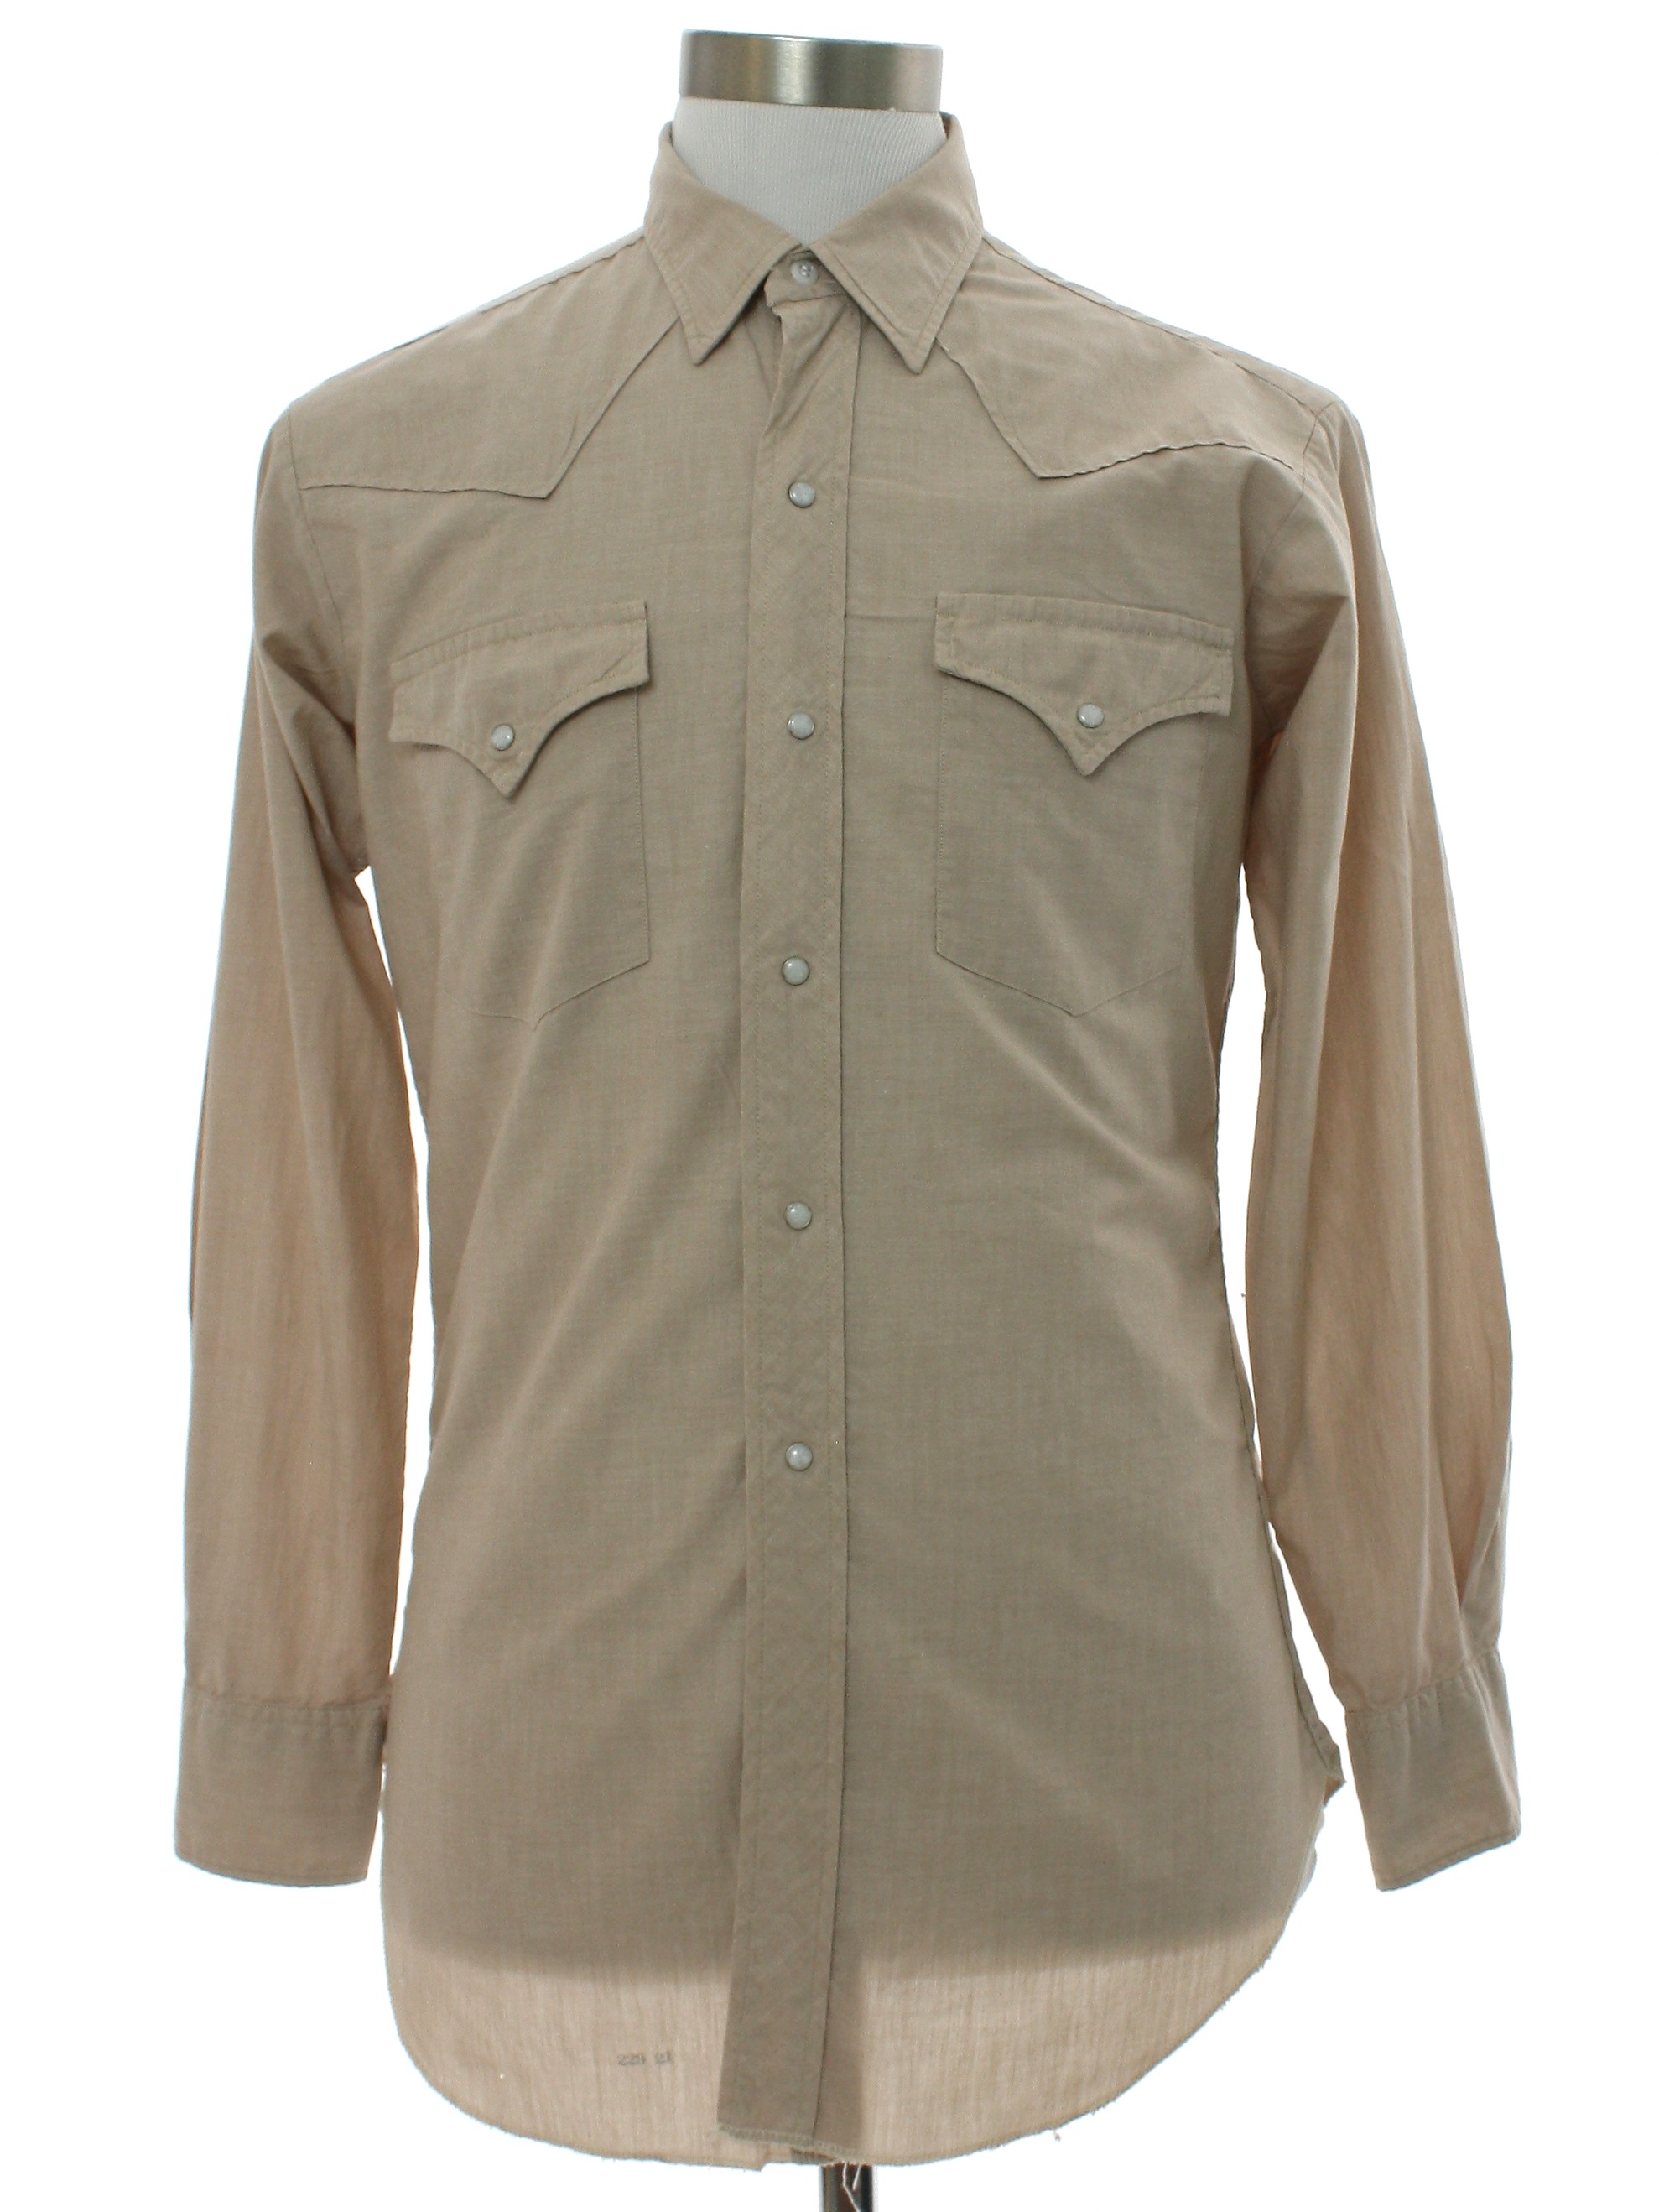 1950's Western Shirt: 50s -Levis Authentic Western Wear Its a Dan River  Fabric- Mens tan cotton broadcloth western shirt with longsleeves, fitted  sides, shirttails hemline, pearl snaps in front, on cuffs, and